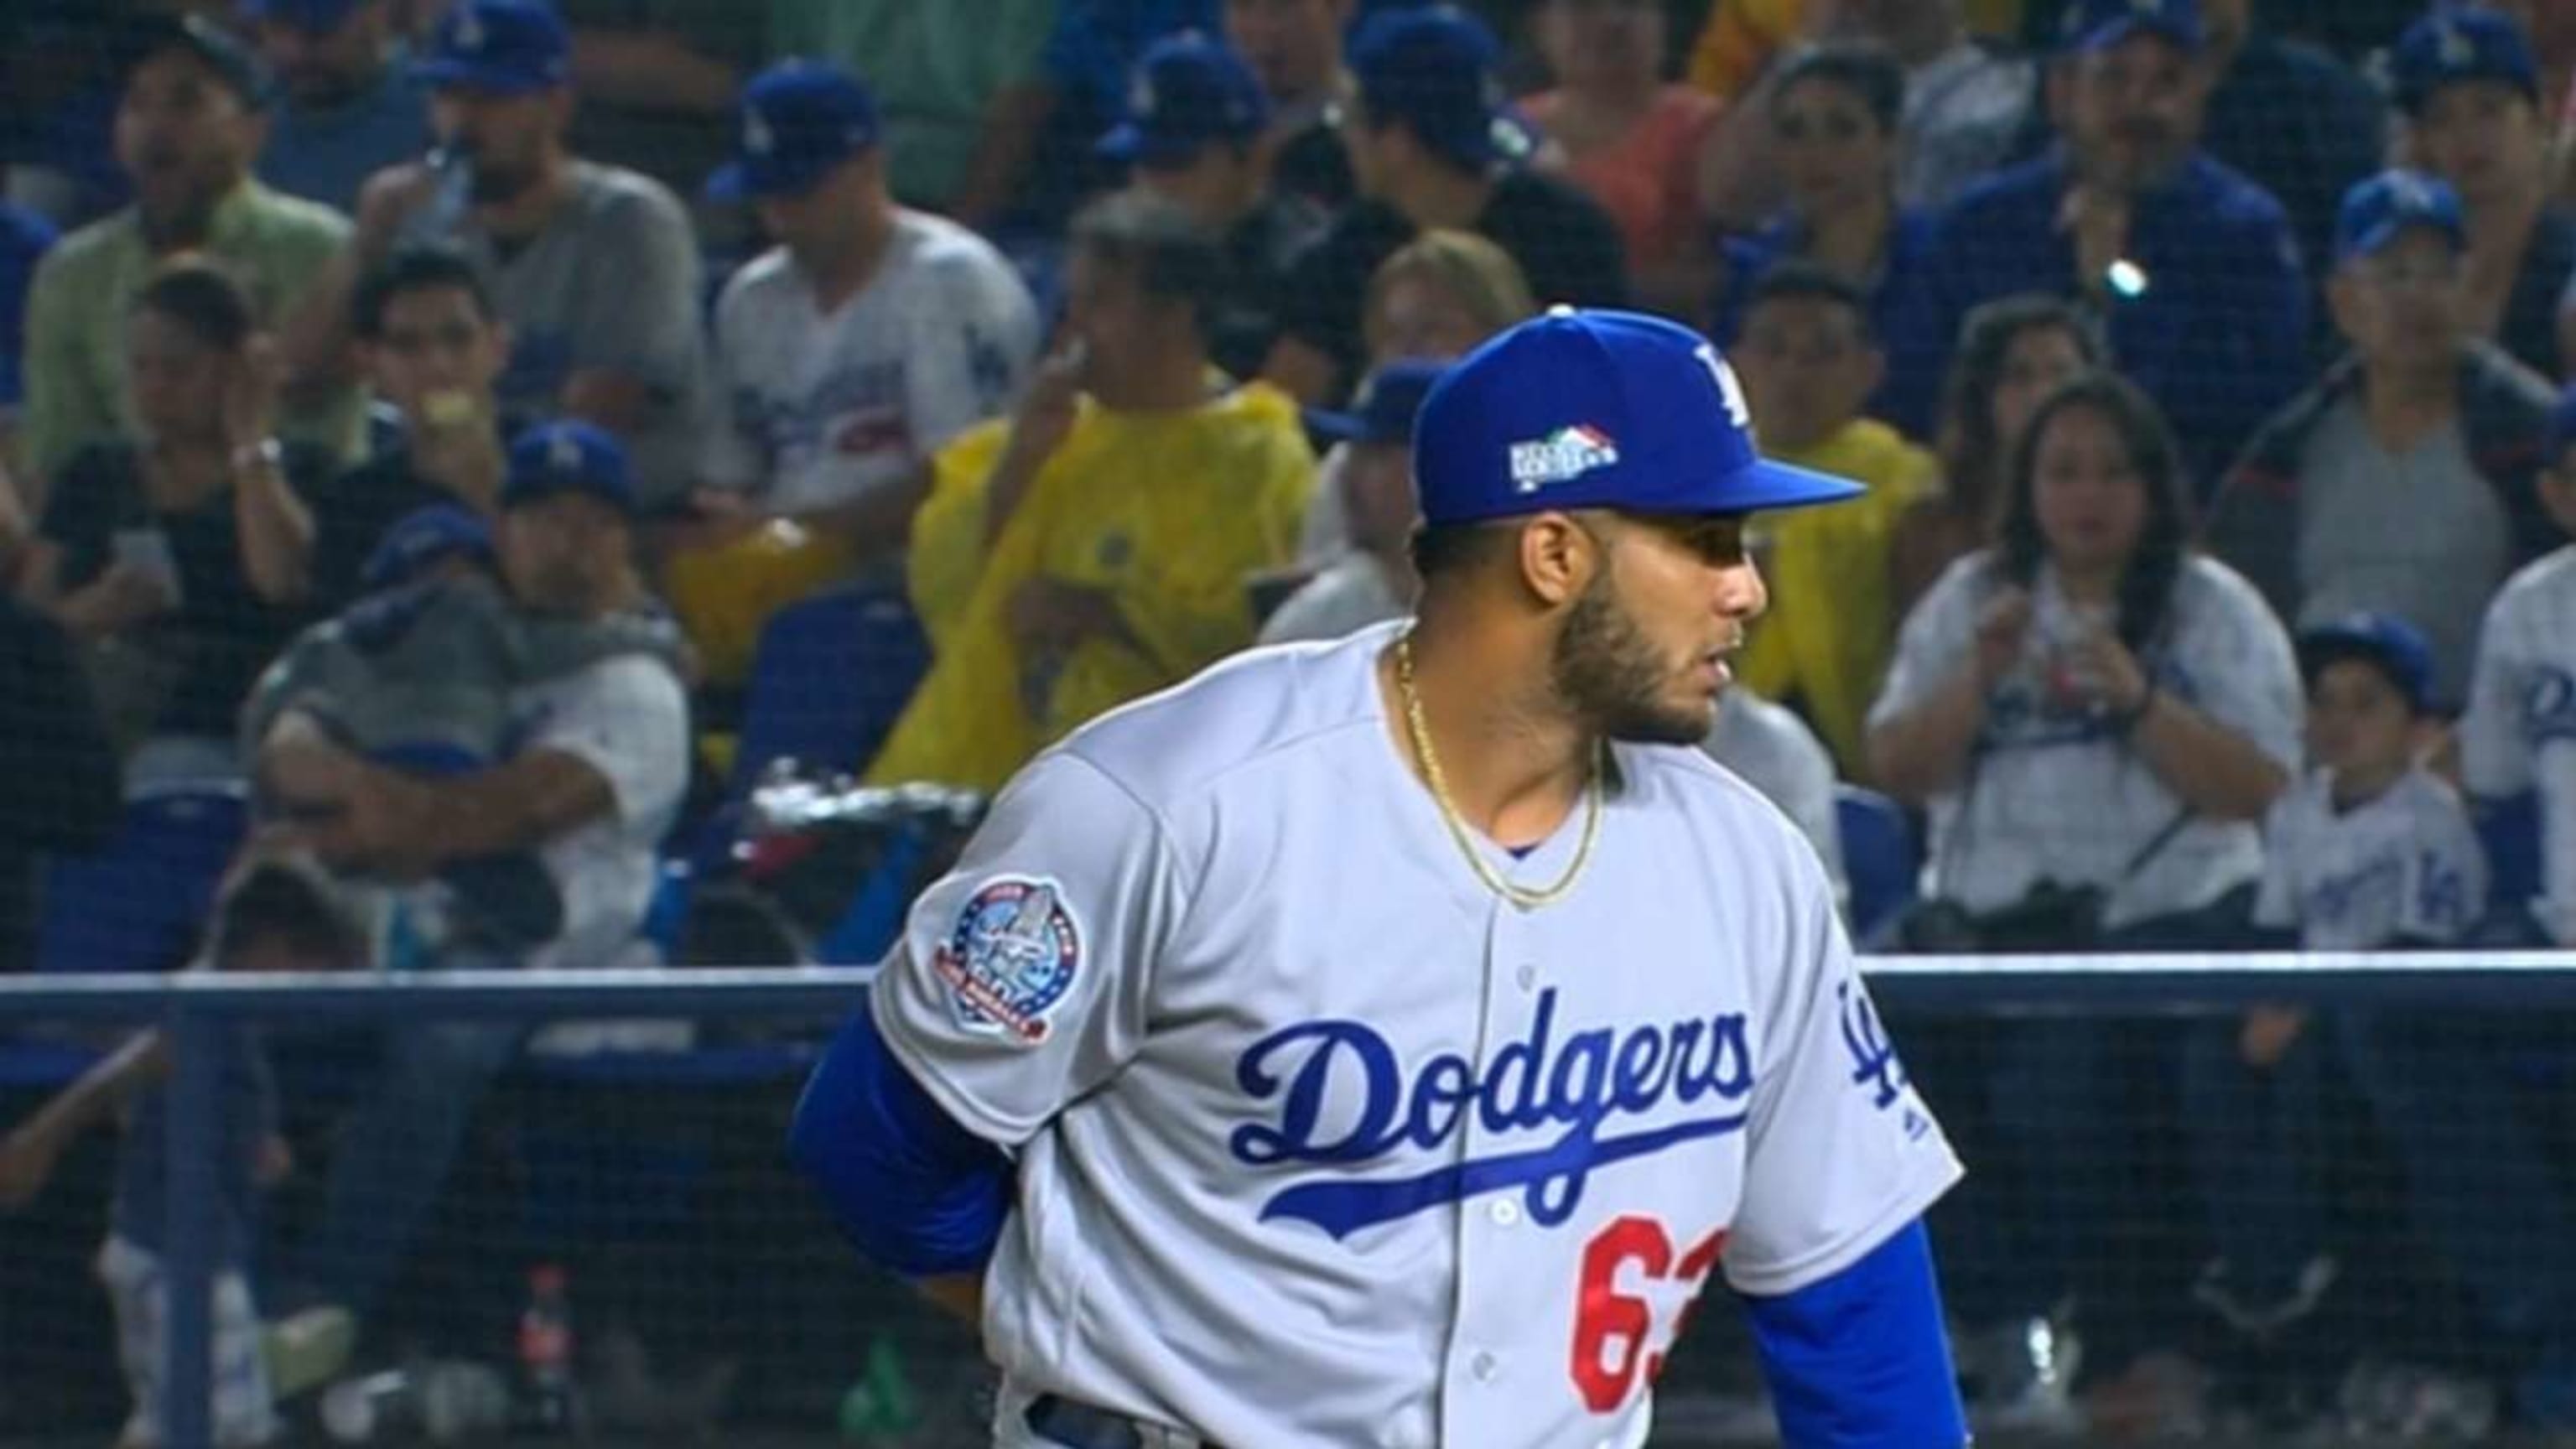 Dodgers score no-hitter in win over Padres in Mexico